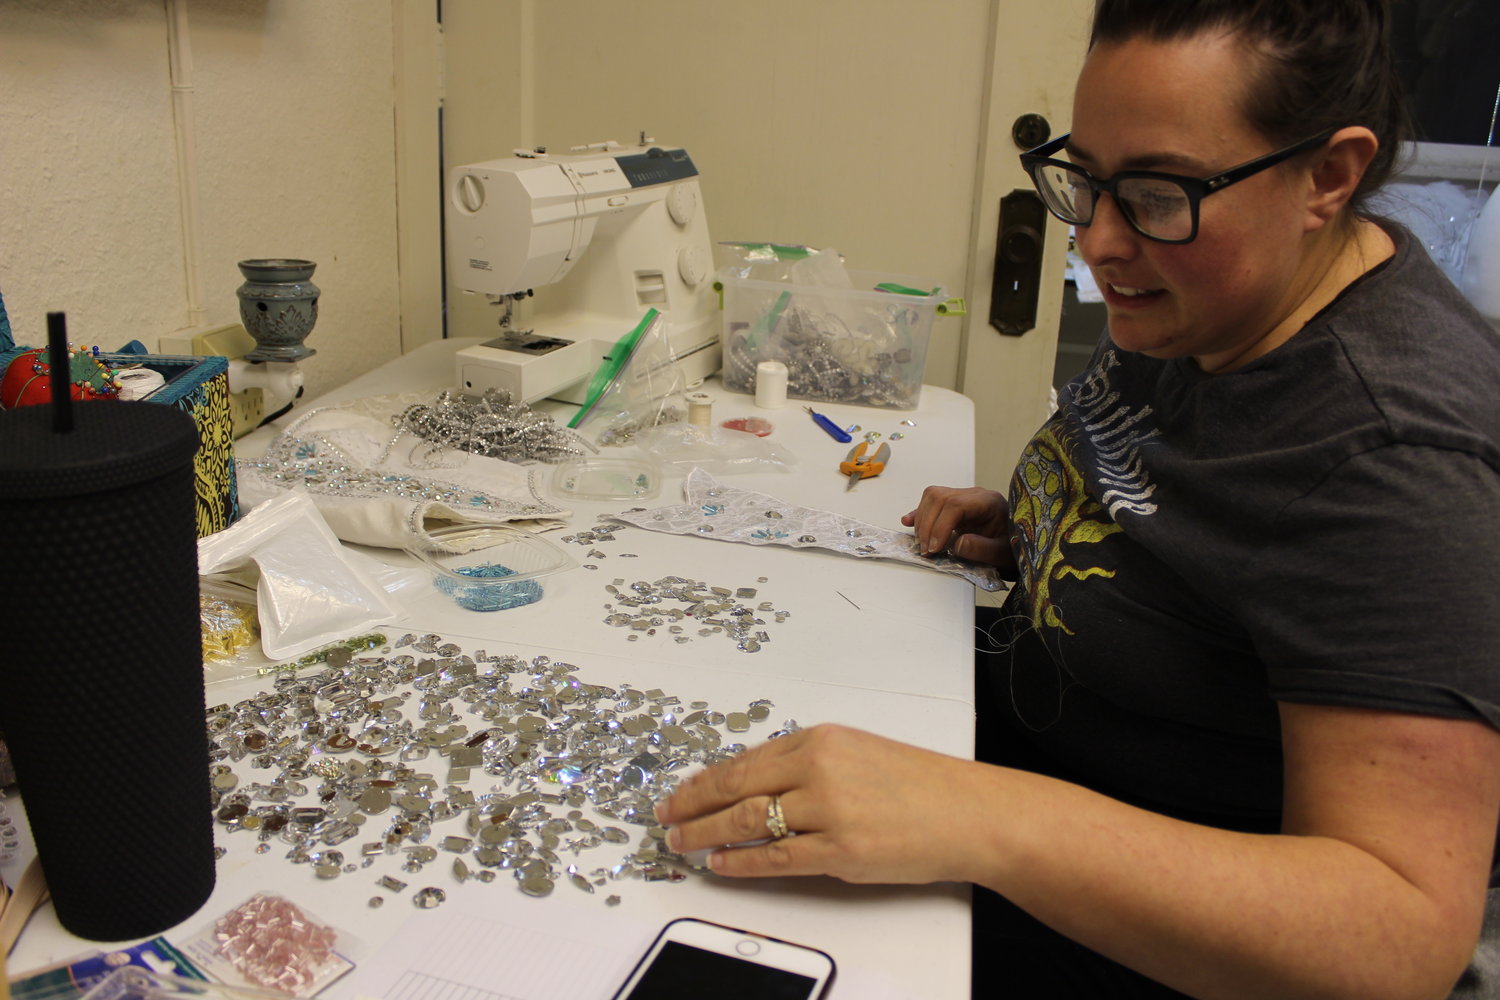 Sunny Evans sifts through gemstones to add to a costume piece for the upcoming performance of "The Nutcracker Ballet" by dancers from Southwest Washington Dance Center in Chehalis, taking place Dec. 16-18 at Corbet Theatre in Centralia.